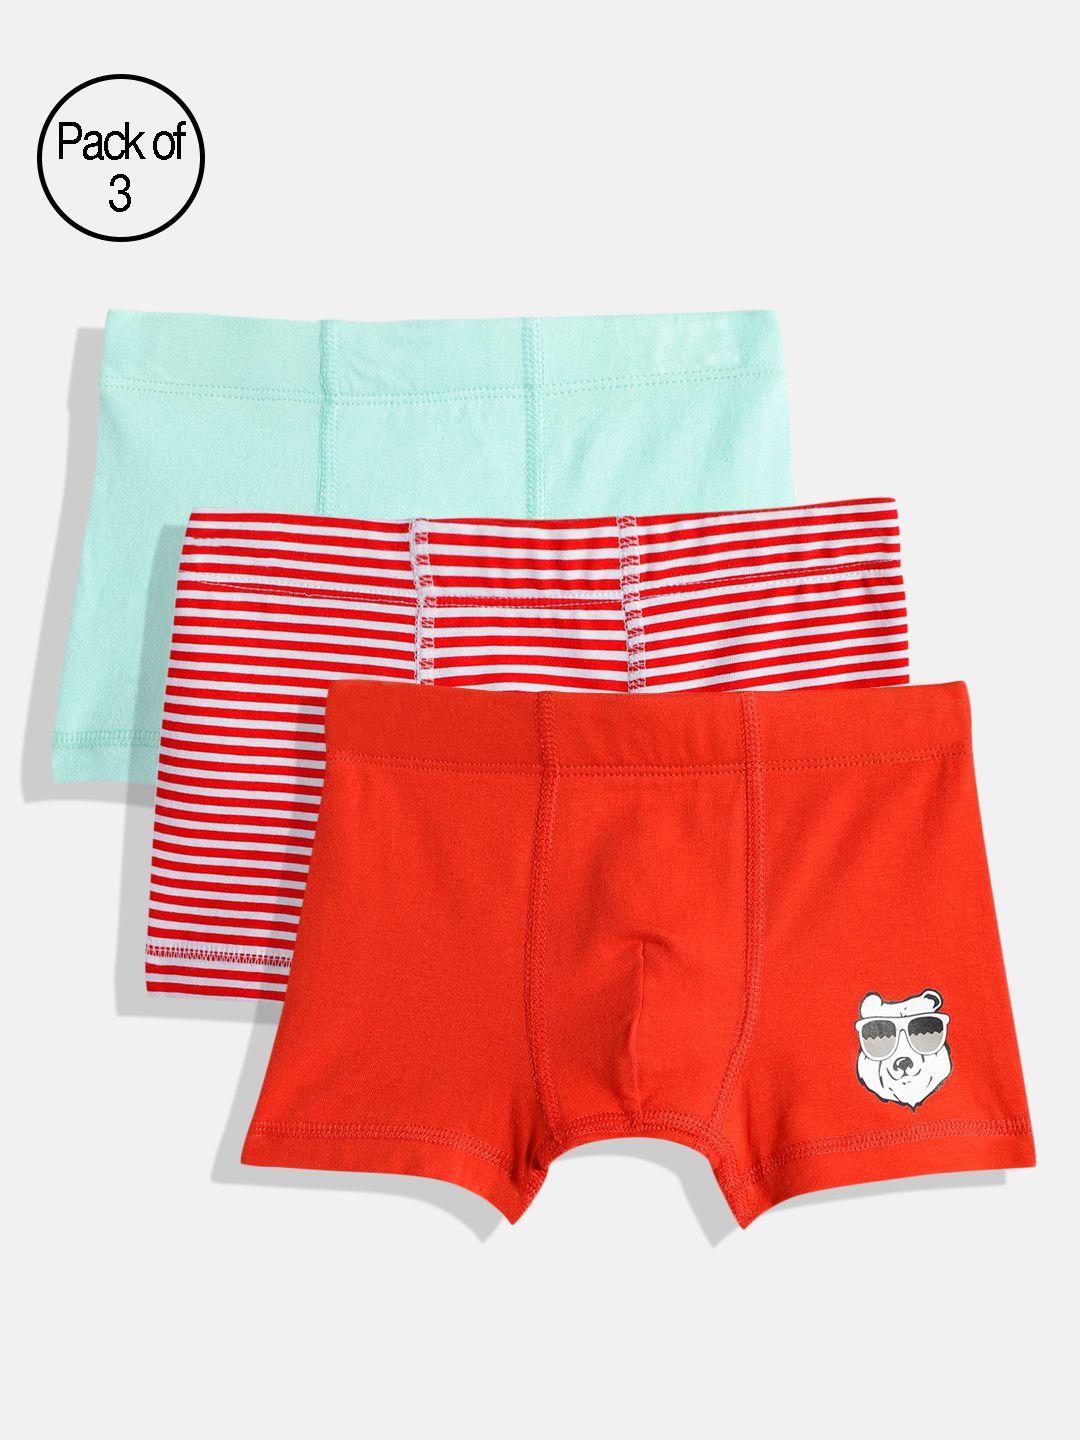 mackly boys pack of 3 pure cotton boxer briefs mb-60-2-4 yrs